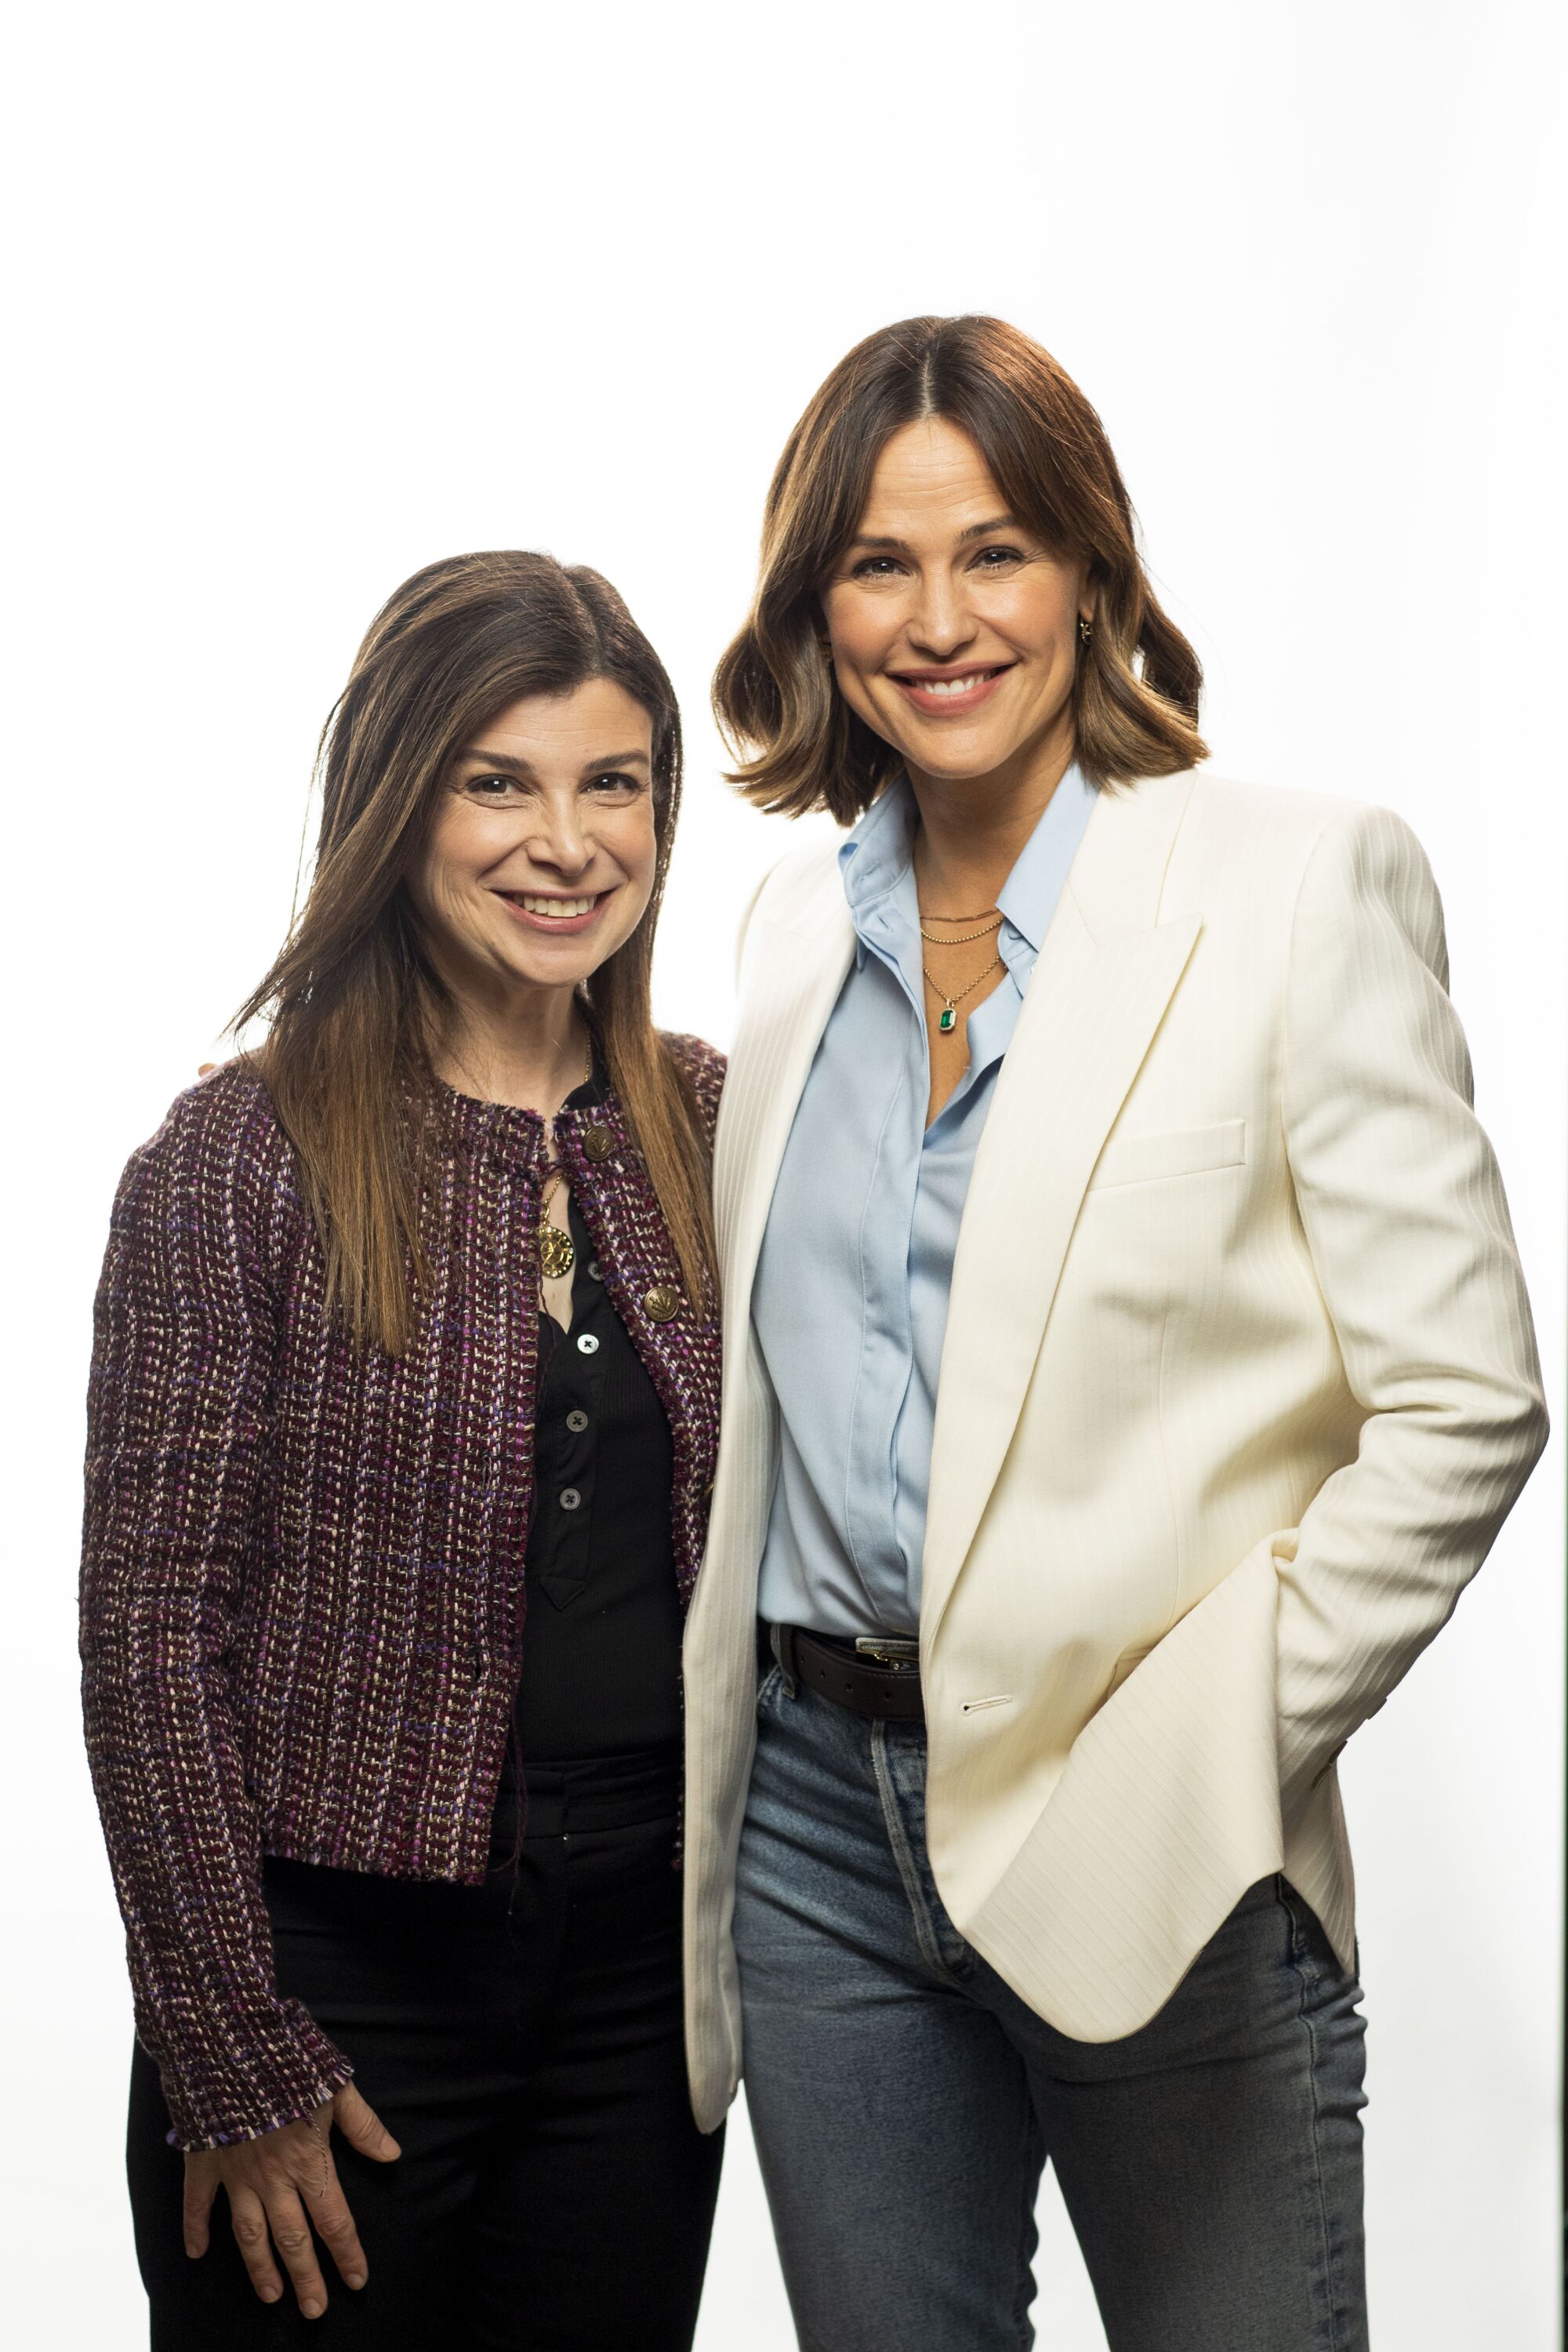 Laura Dave and Jennifer Garner at the Los Angeles Times Festival of Books Portrait Studio.